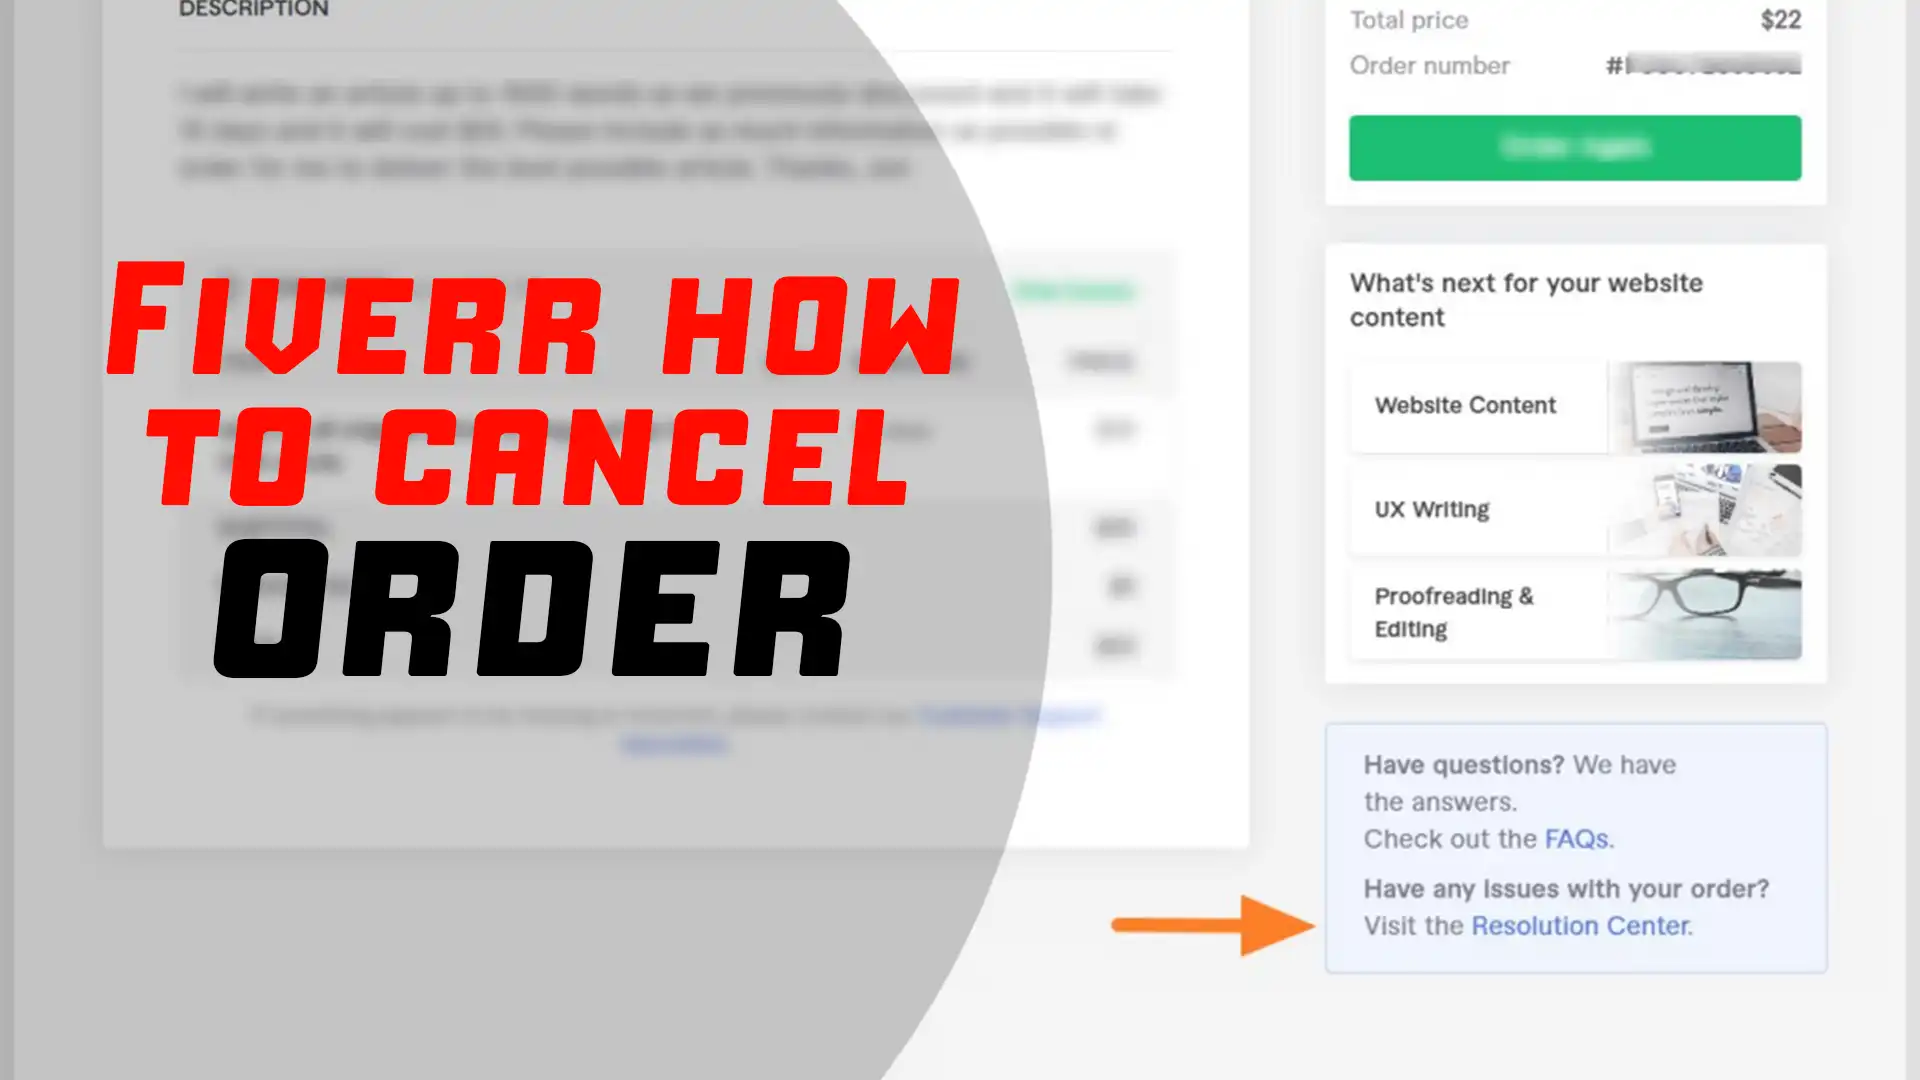 Fiverr how to cancel order